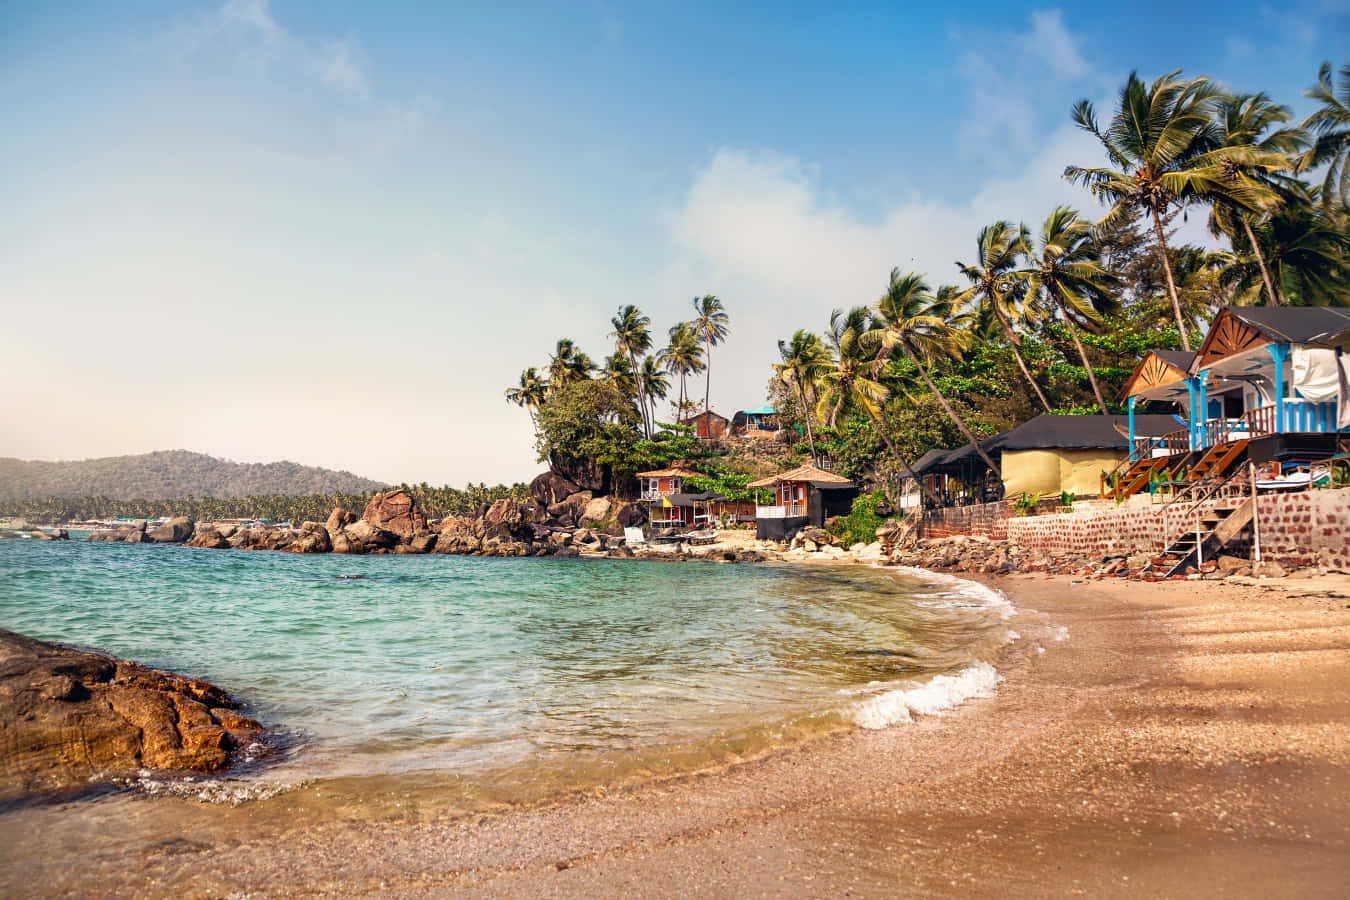 Feel the sun and sand between your toes in Goa